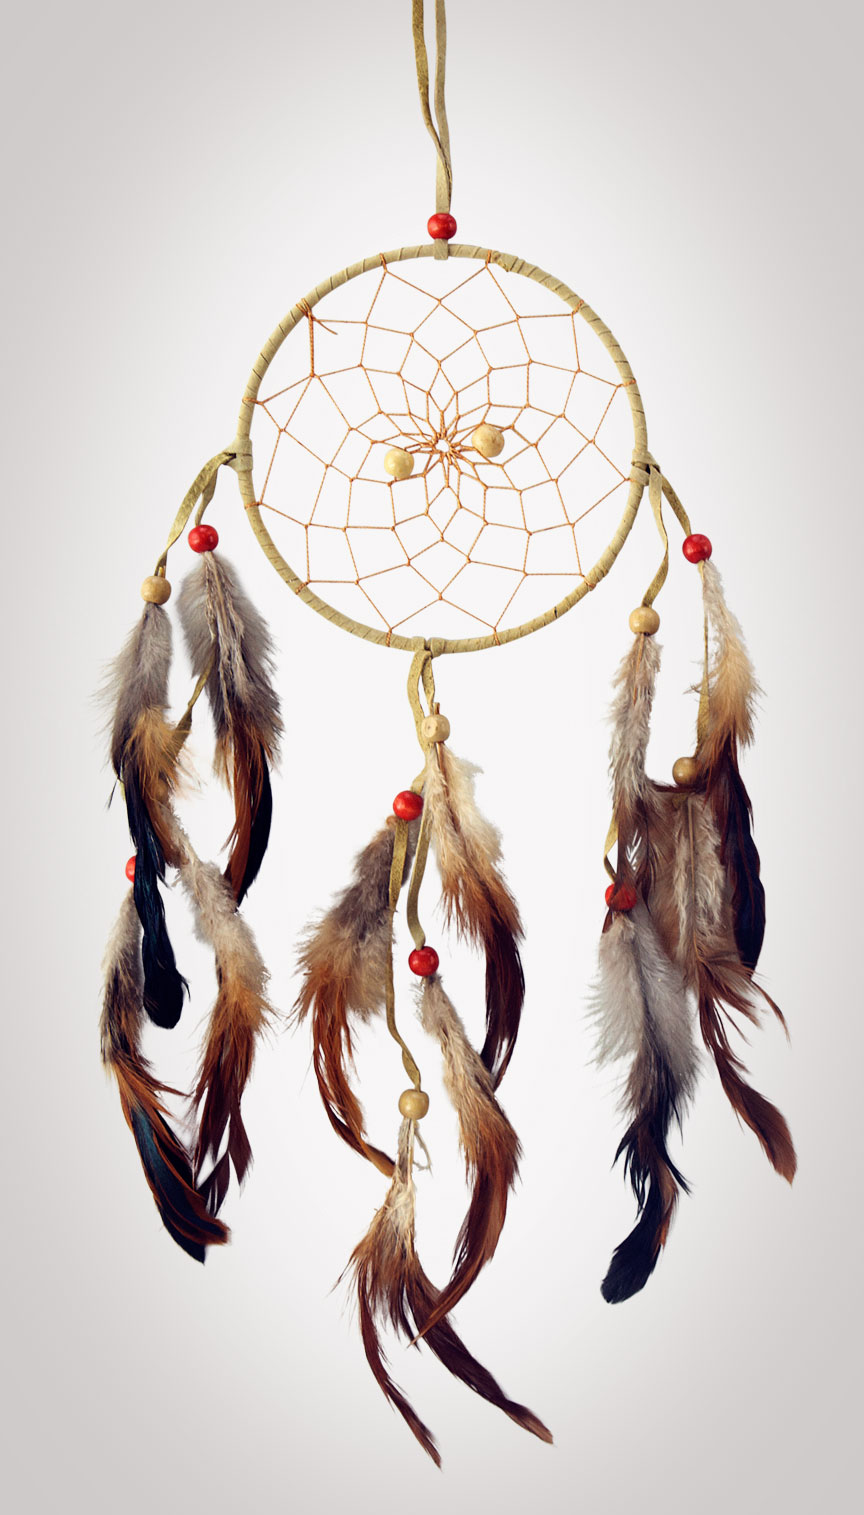 Shows an image of our dreamcatcher owg002